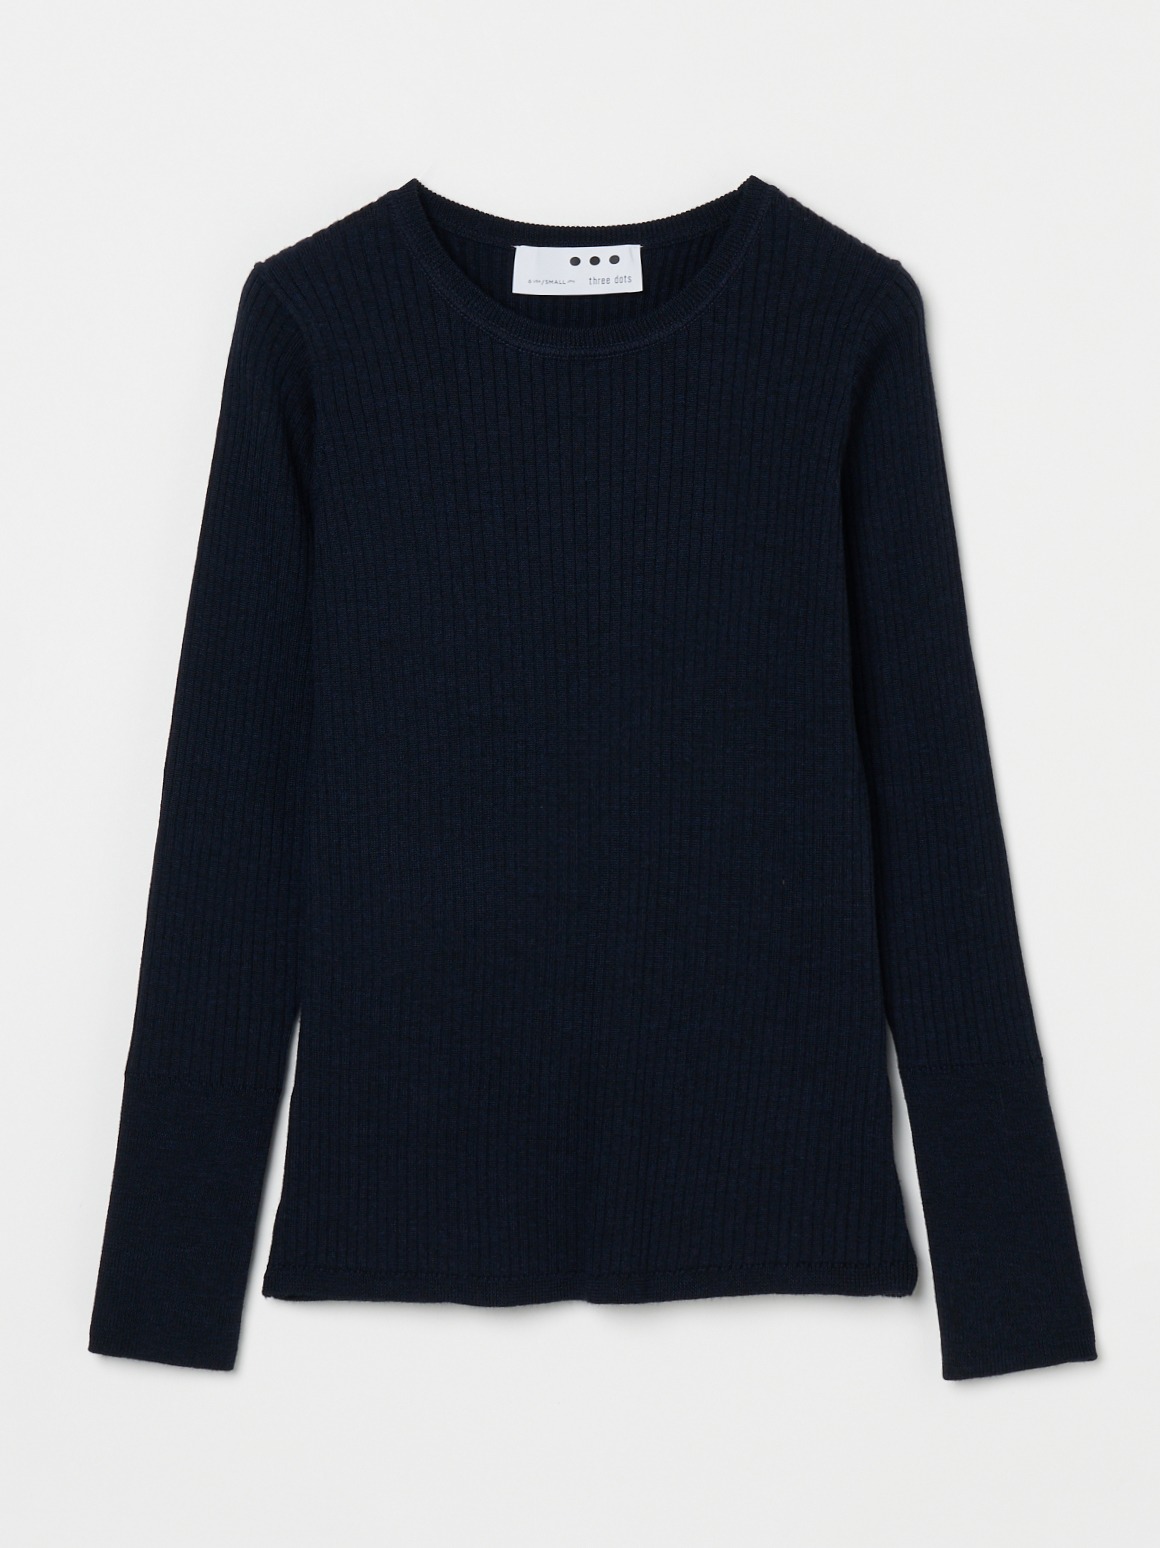 Wool outfit rib tee knit 詳細画像 navy 2